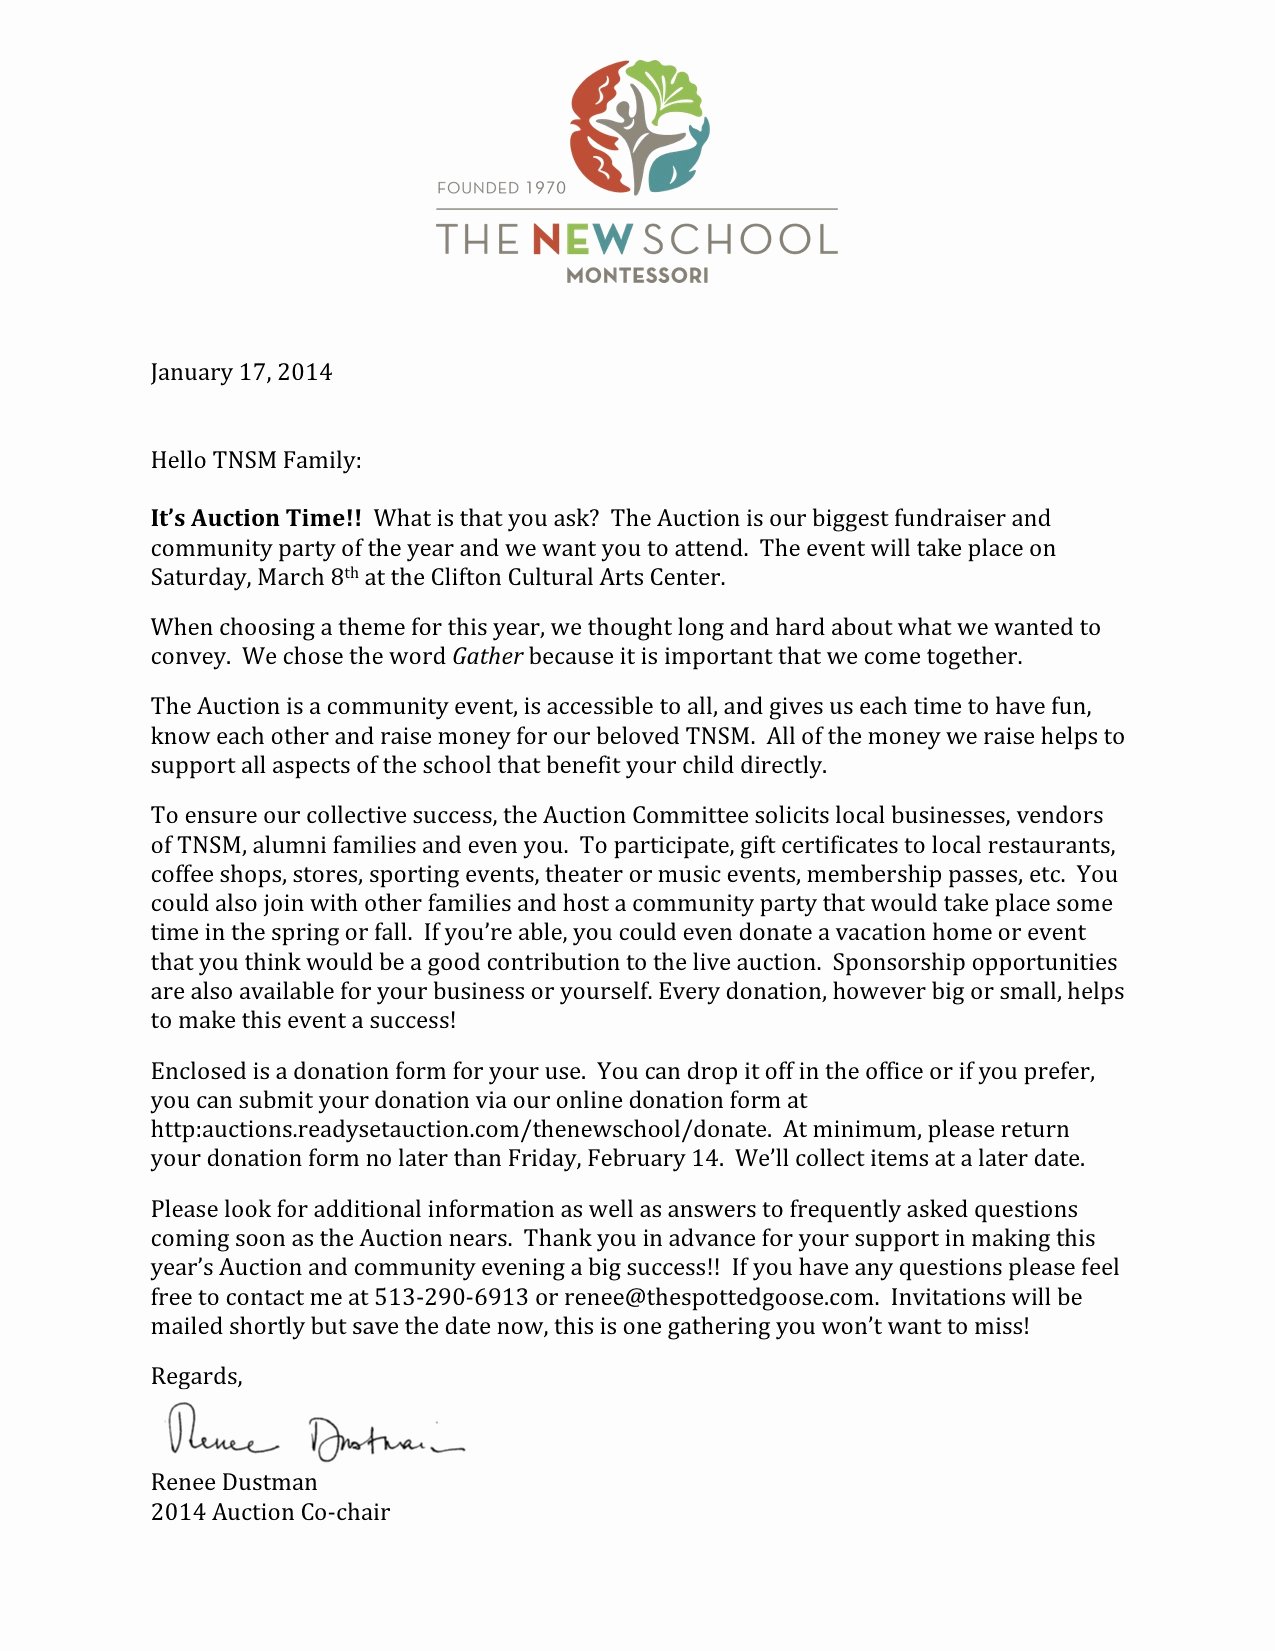 Mission Trip Fundraising Letter Template Lovely Auction Letter and Donation form the New School Montessori